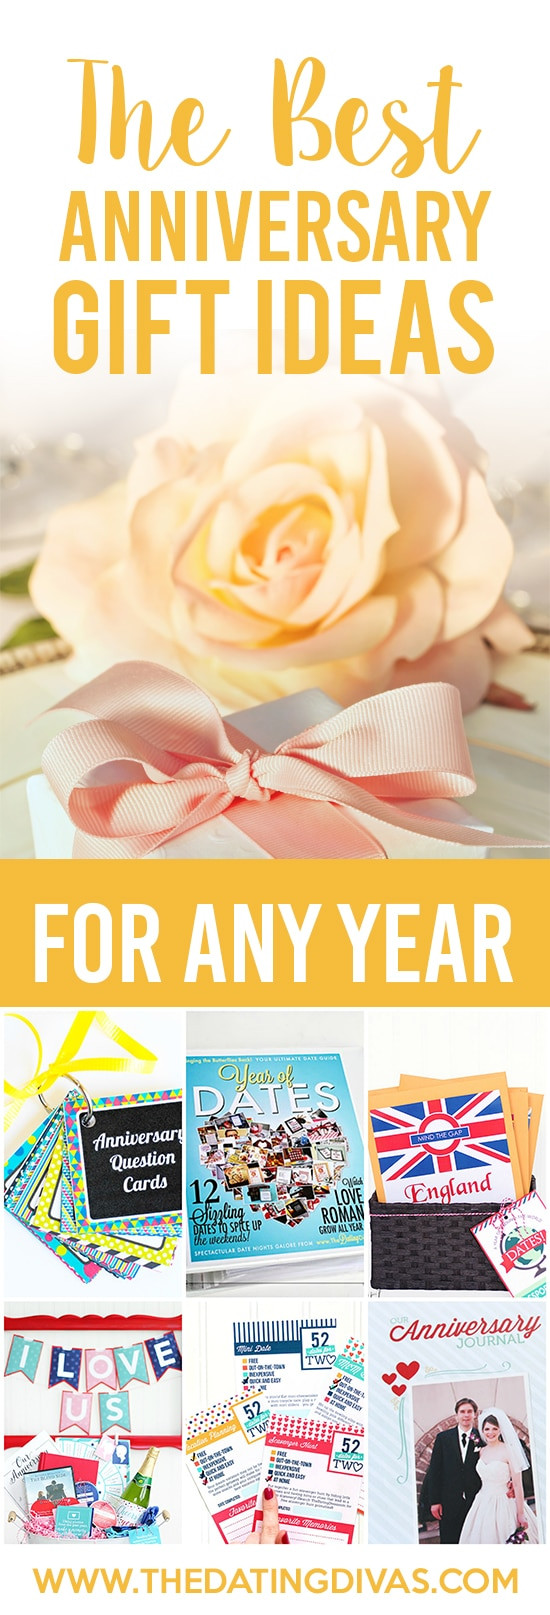 Women'S Anniversary Gift Ideas
 Anniversary Gifts By Year for Spouses From The Dating Divas